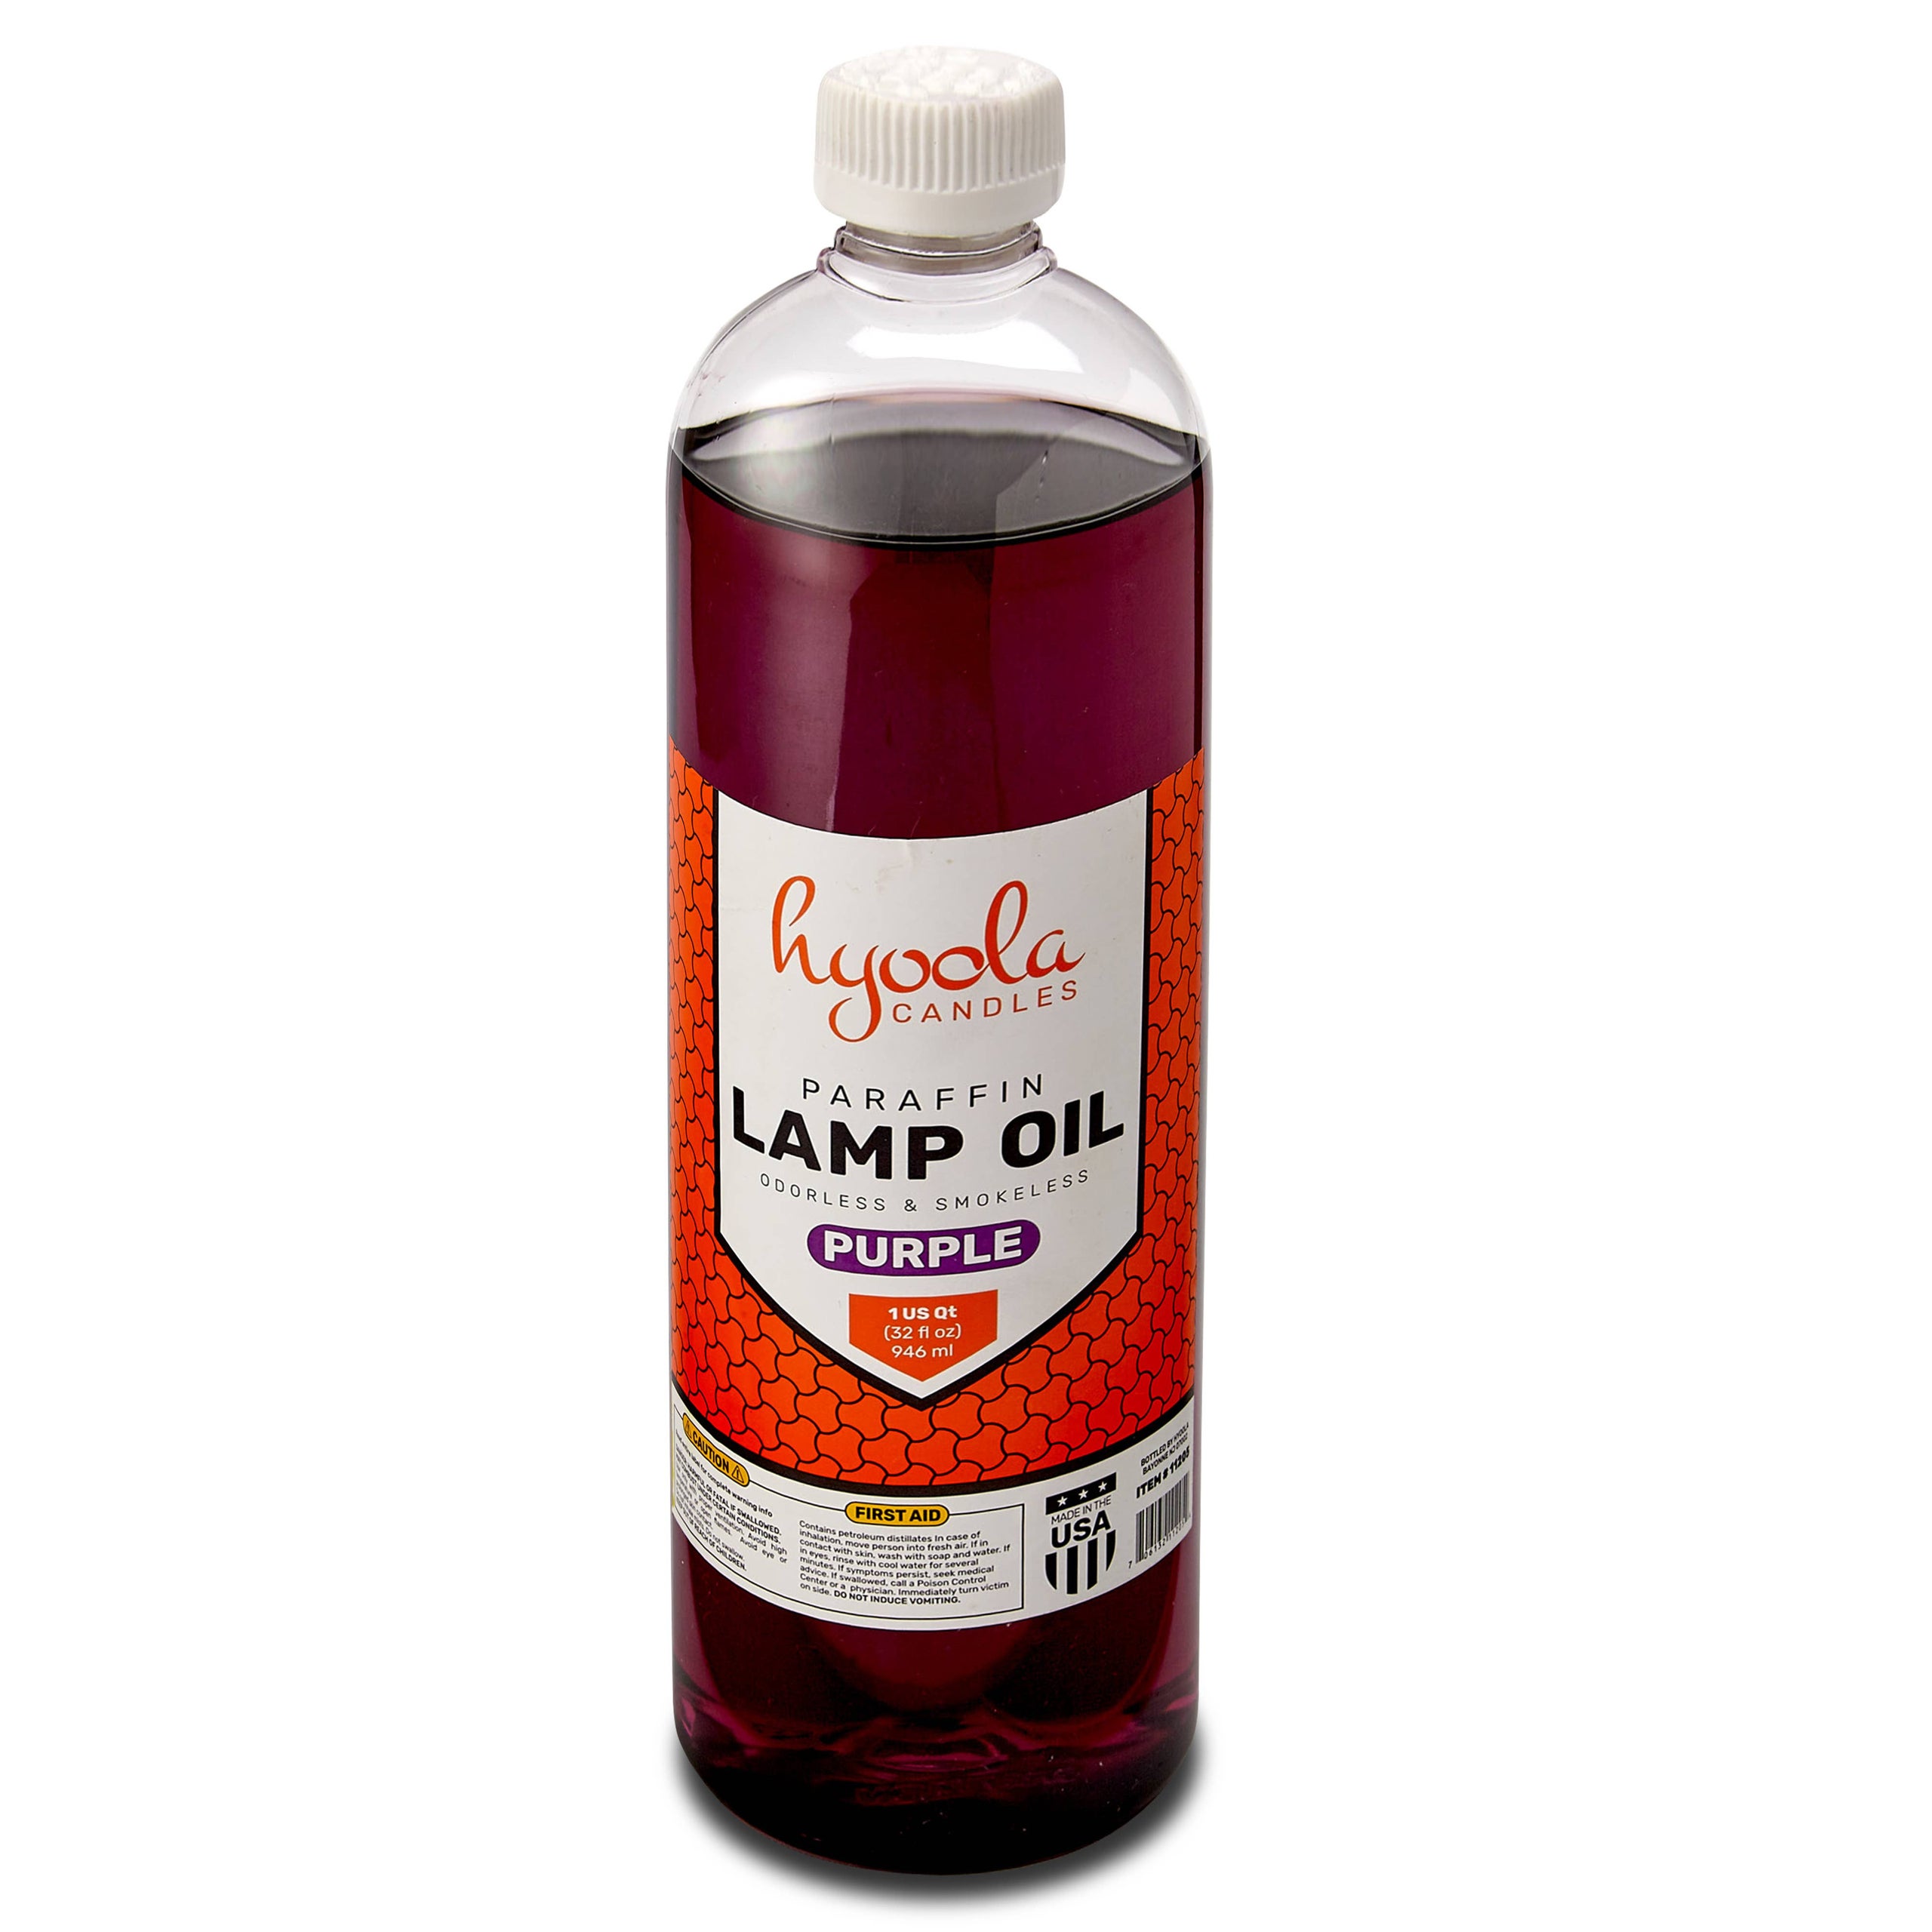 Hyoola Smokeless Odorless Liquid Paraffin Lamp Oil - Red - 32 Ounce - 1 Pack